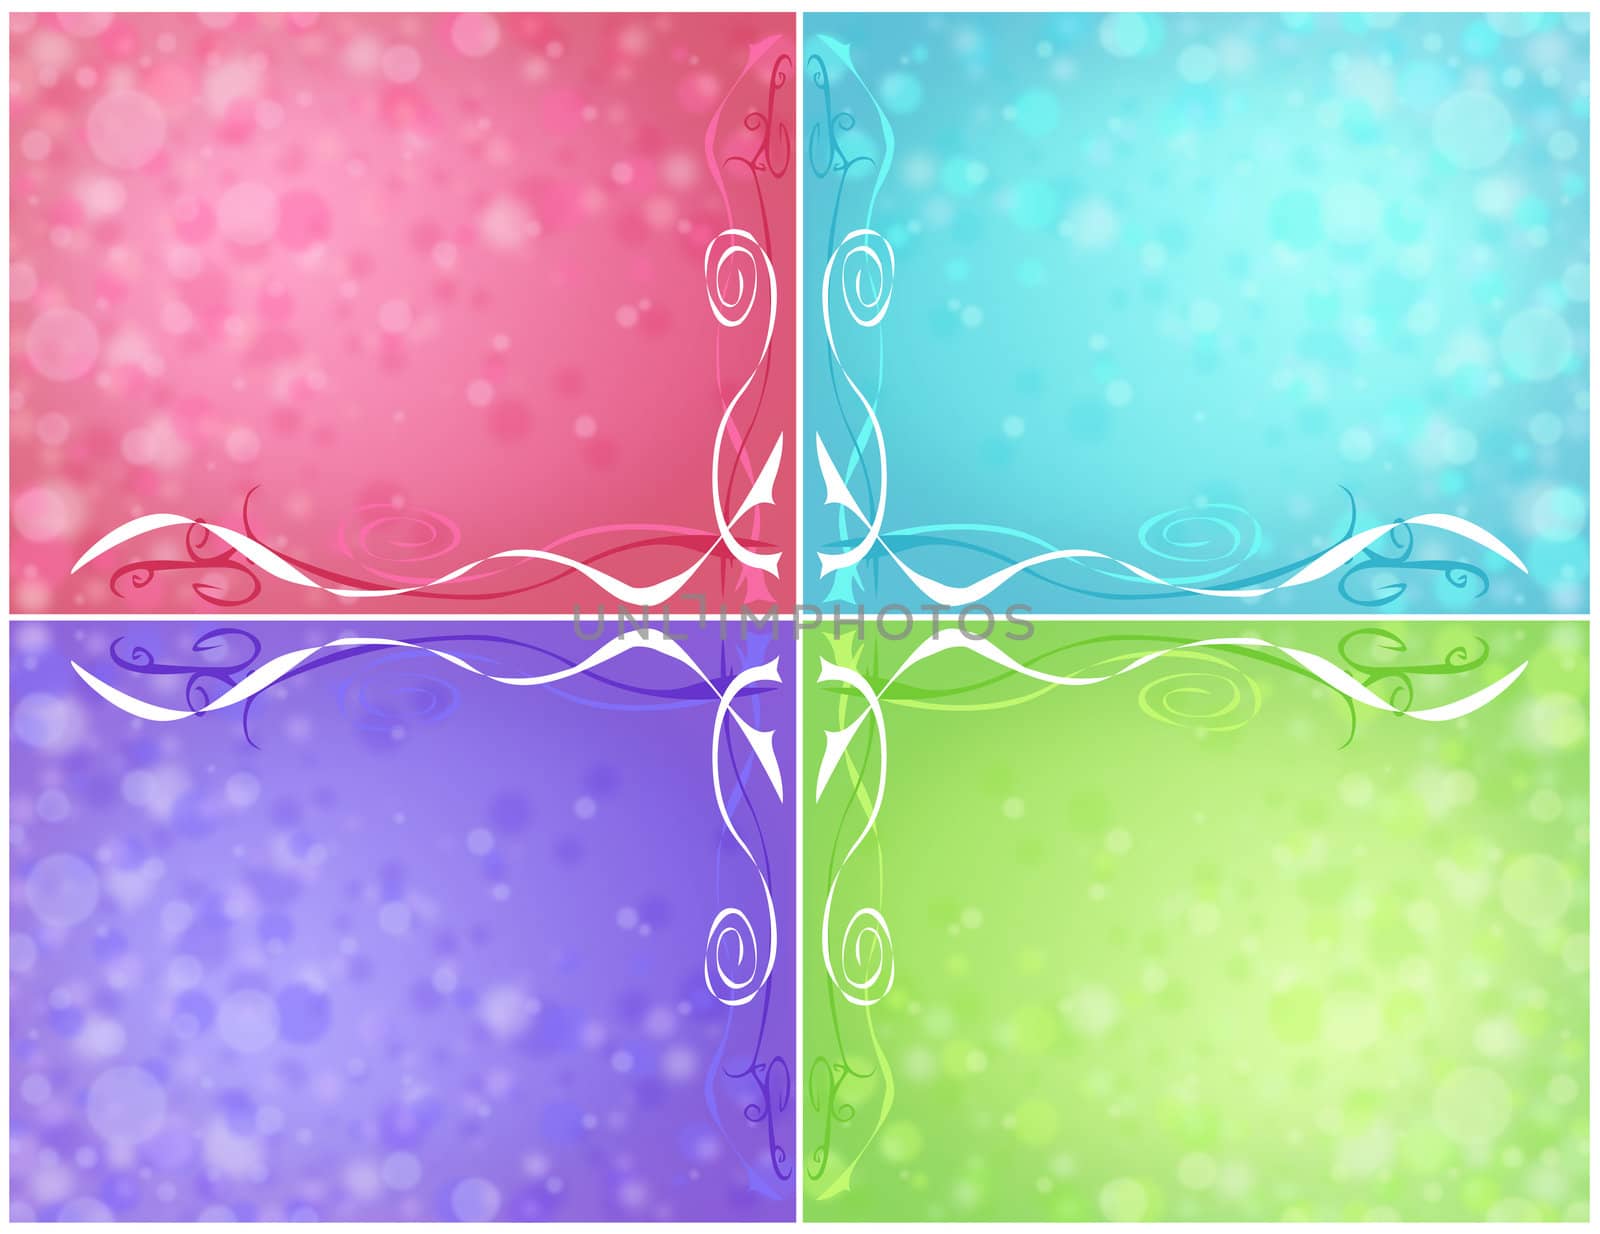 Very large colorful fun flourishes and light filled wallpaper ba by Mirage3